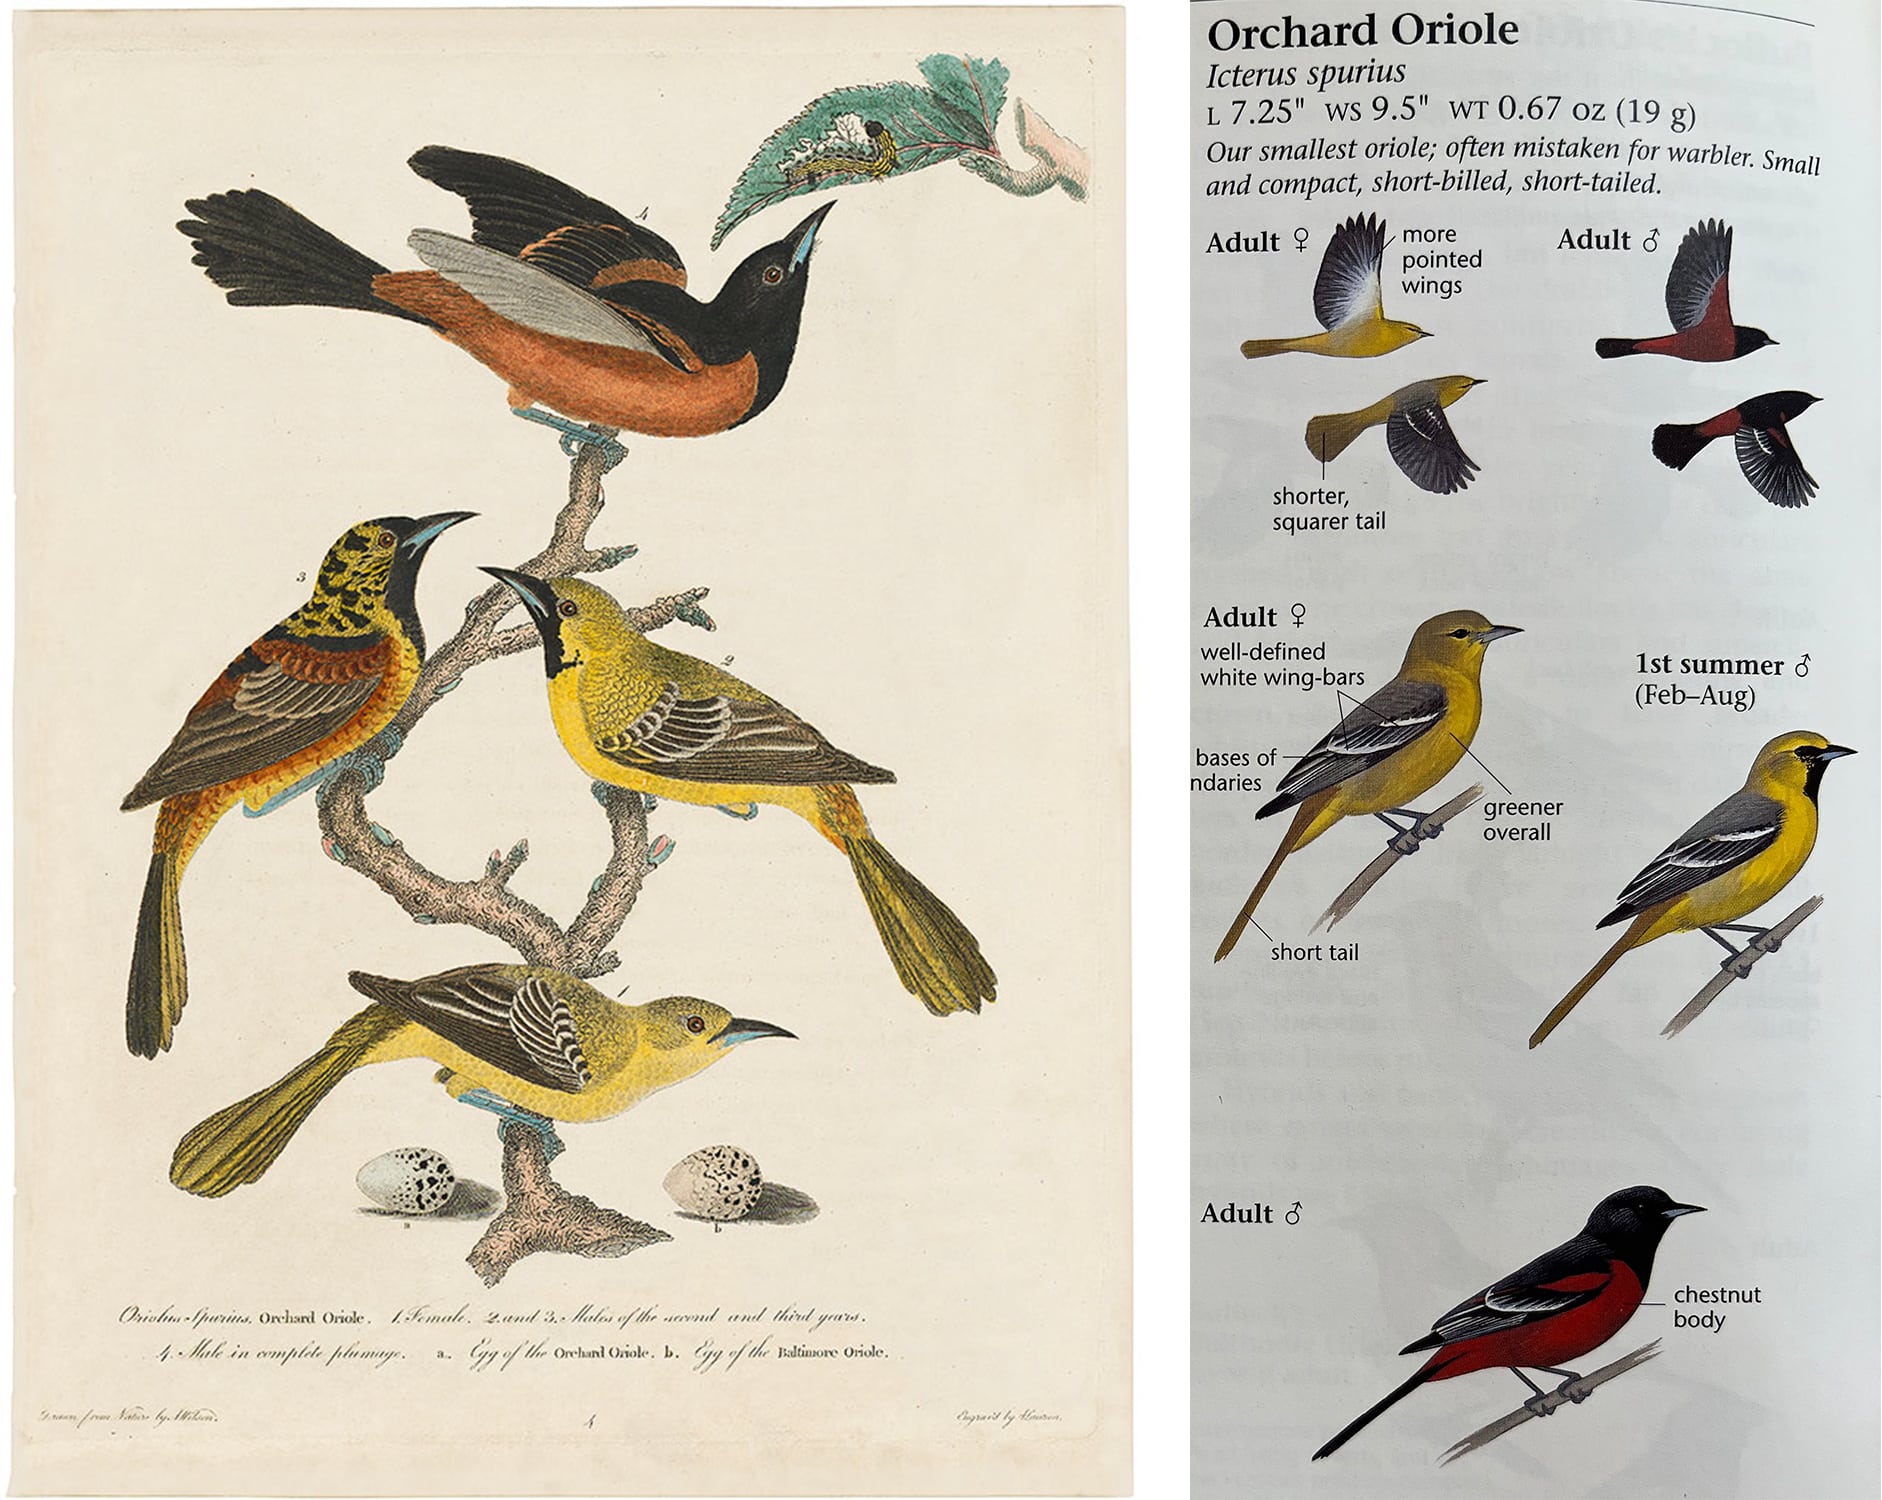 Wilson and Sibley's Orioles